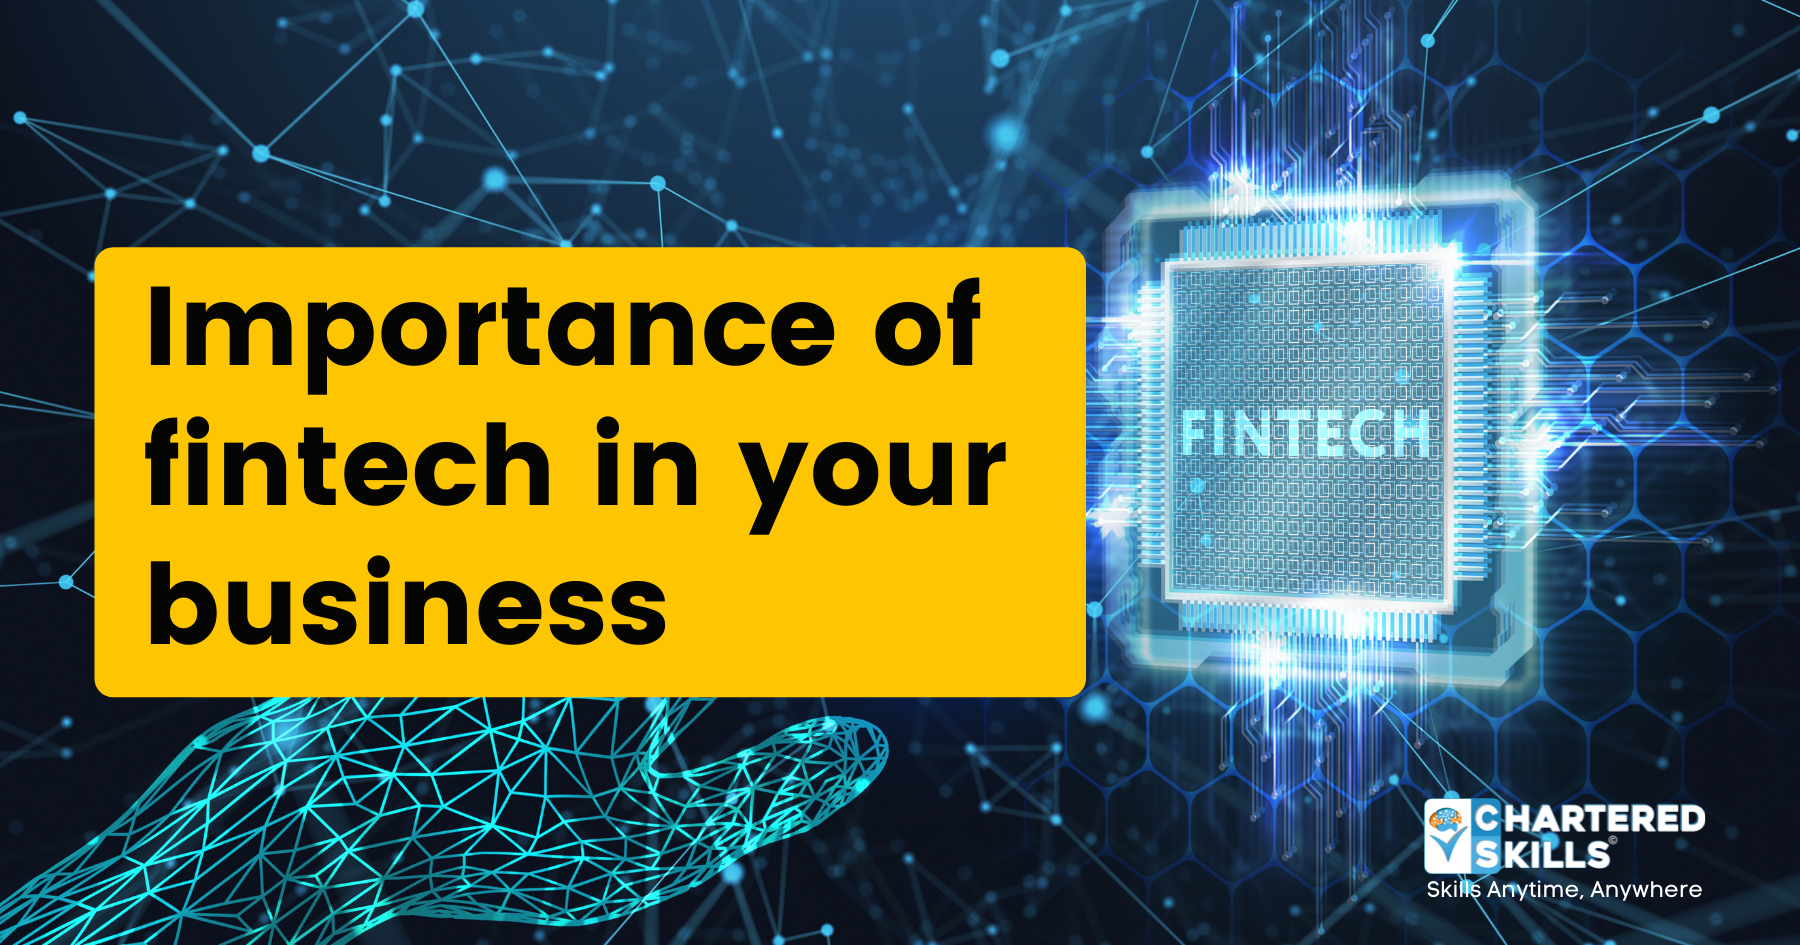 Importance of fintech in your business